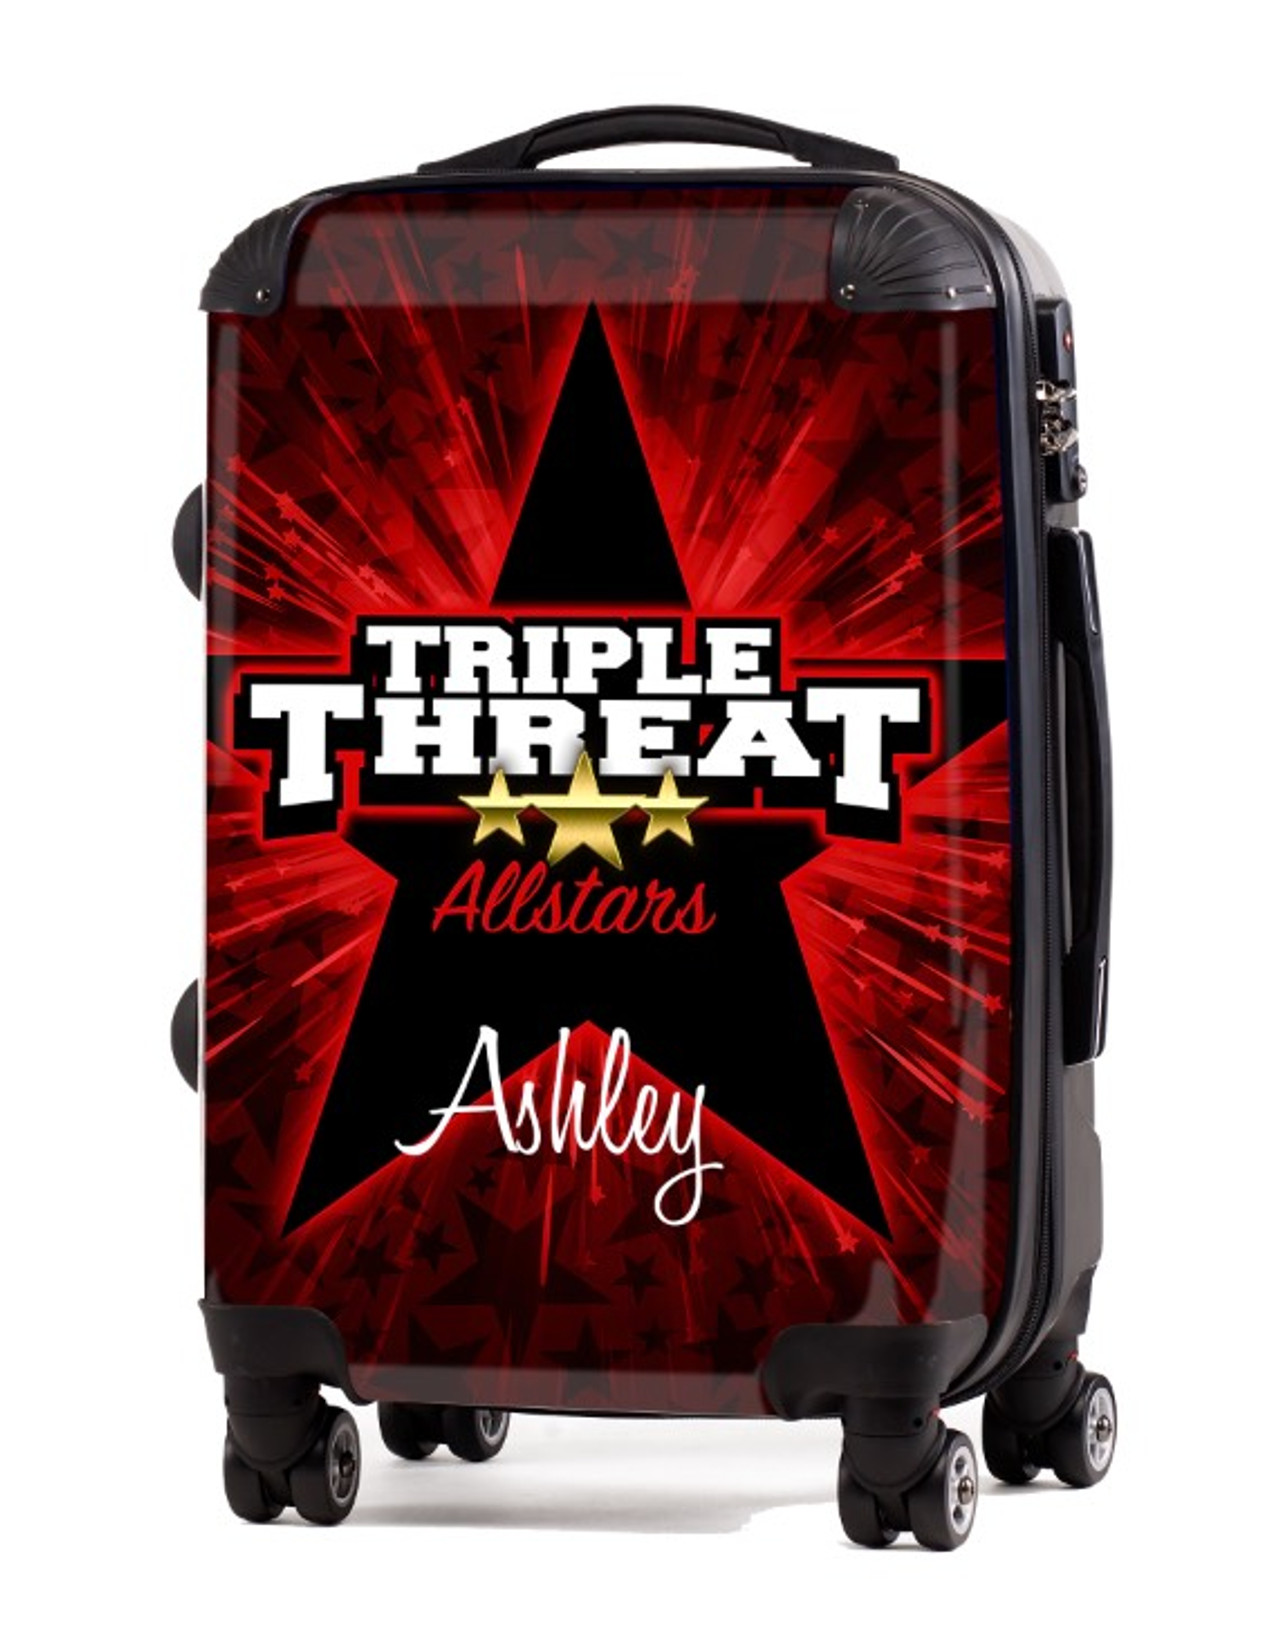 Florida Triple Threat All Stars 20 Carry On Luggage Cheer Luggage